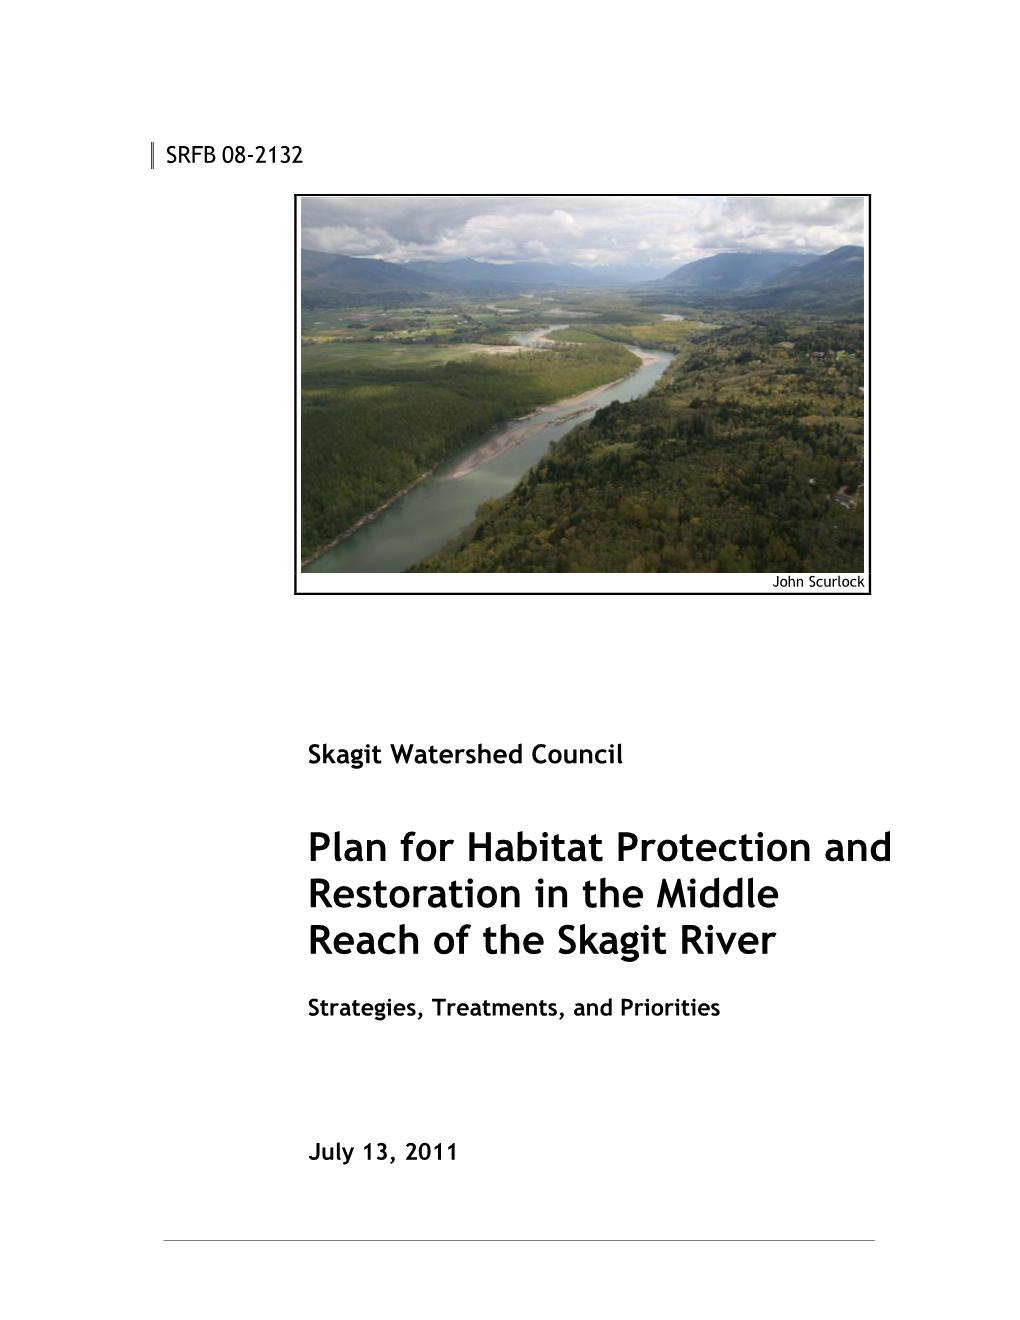 Plan for Habitat Protection and Restoration in the Middle Reach of the Skagit River